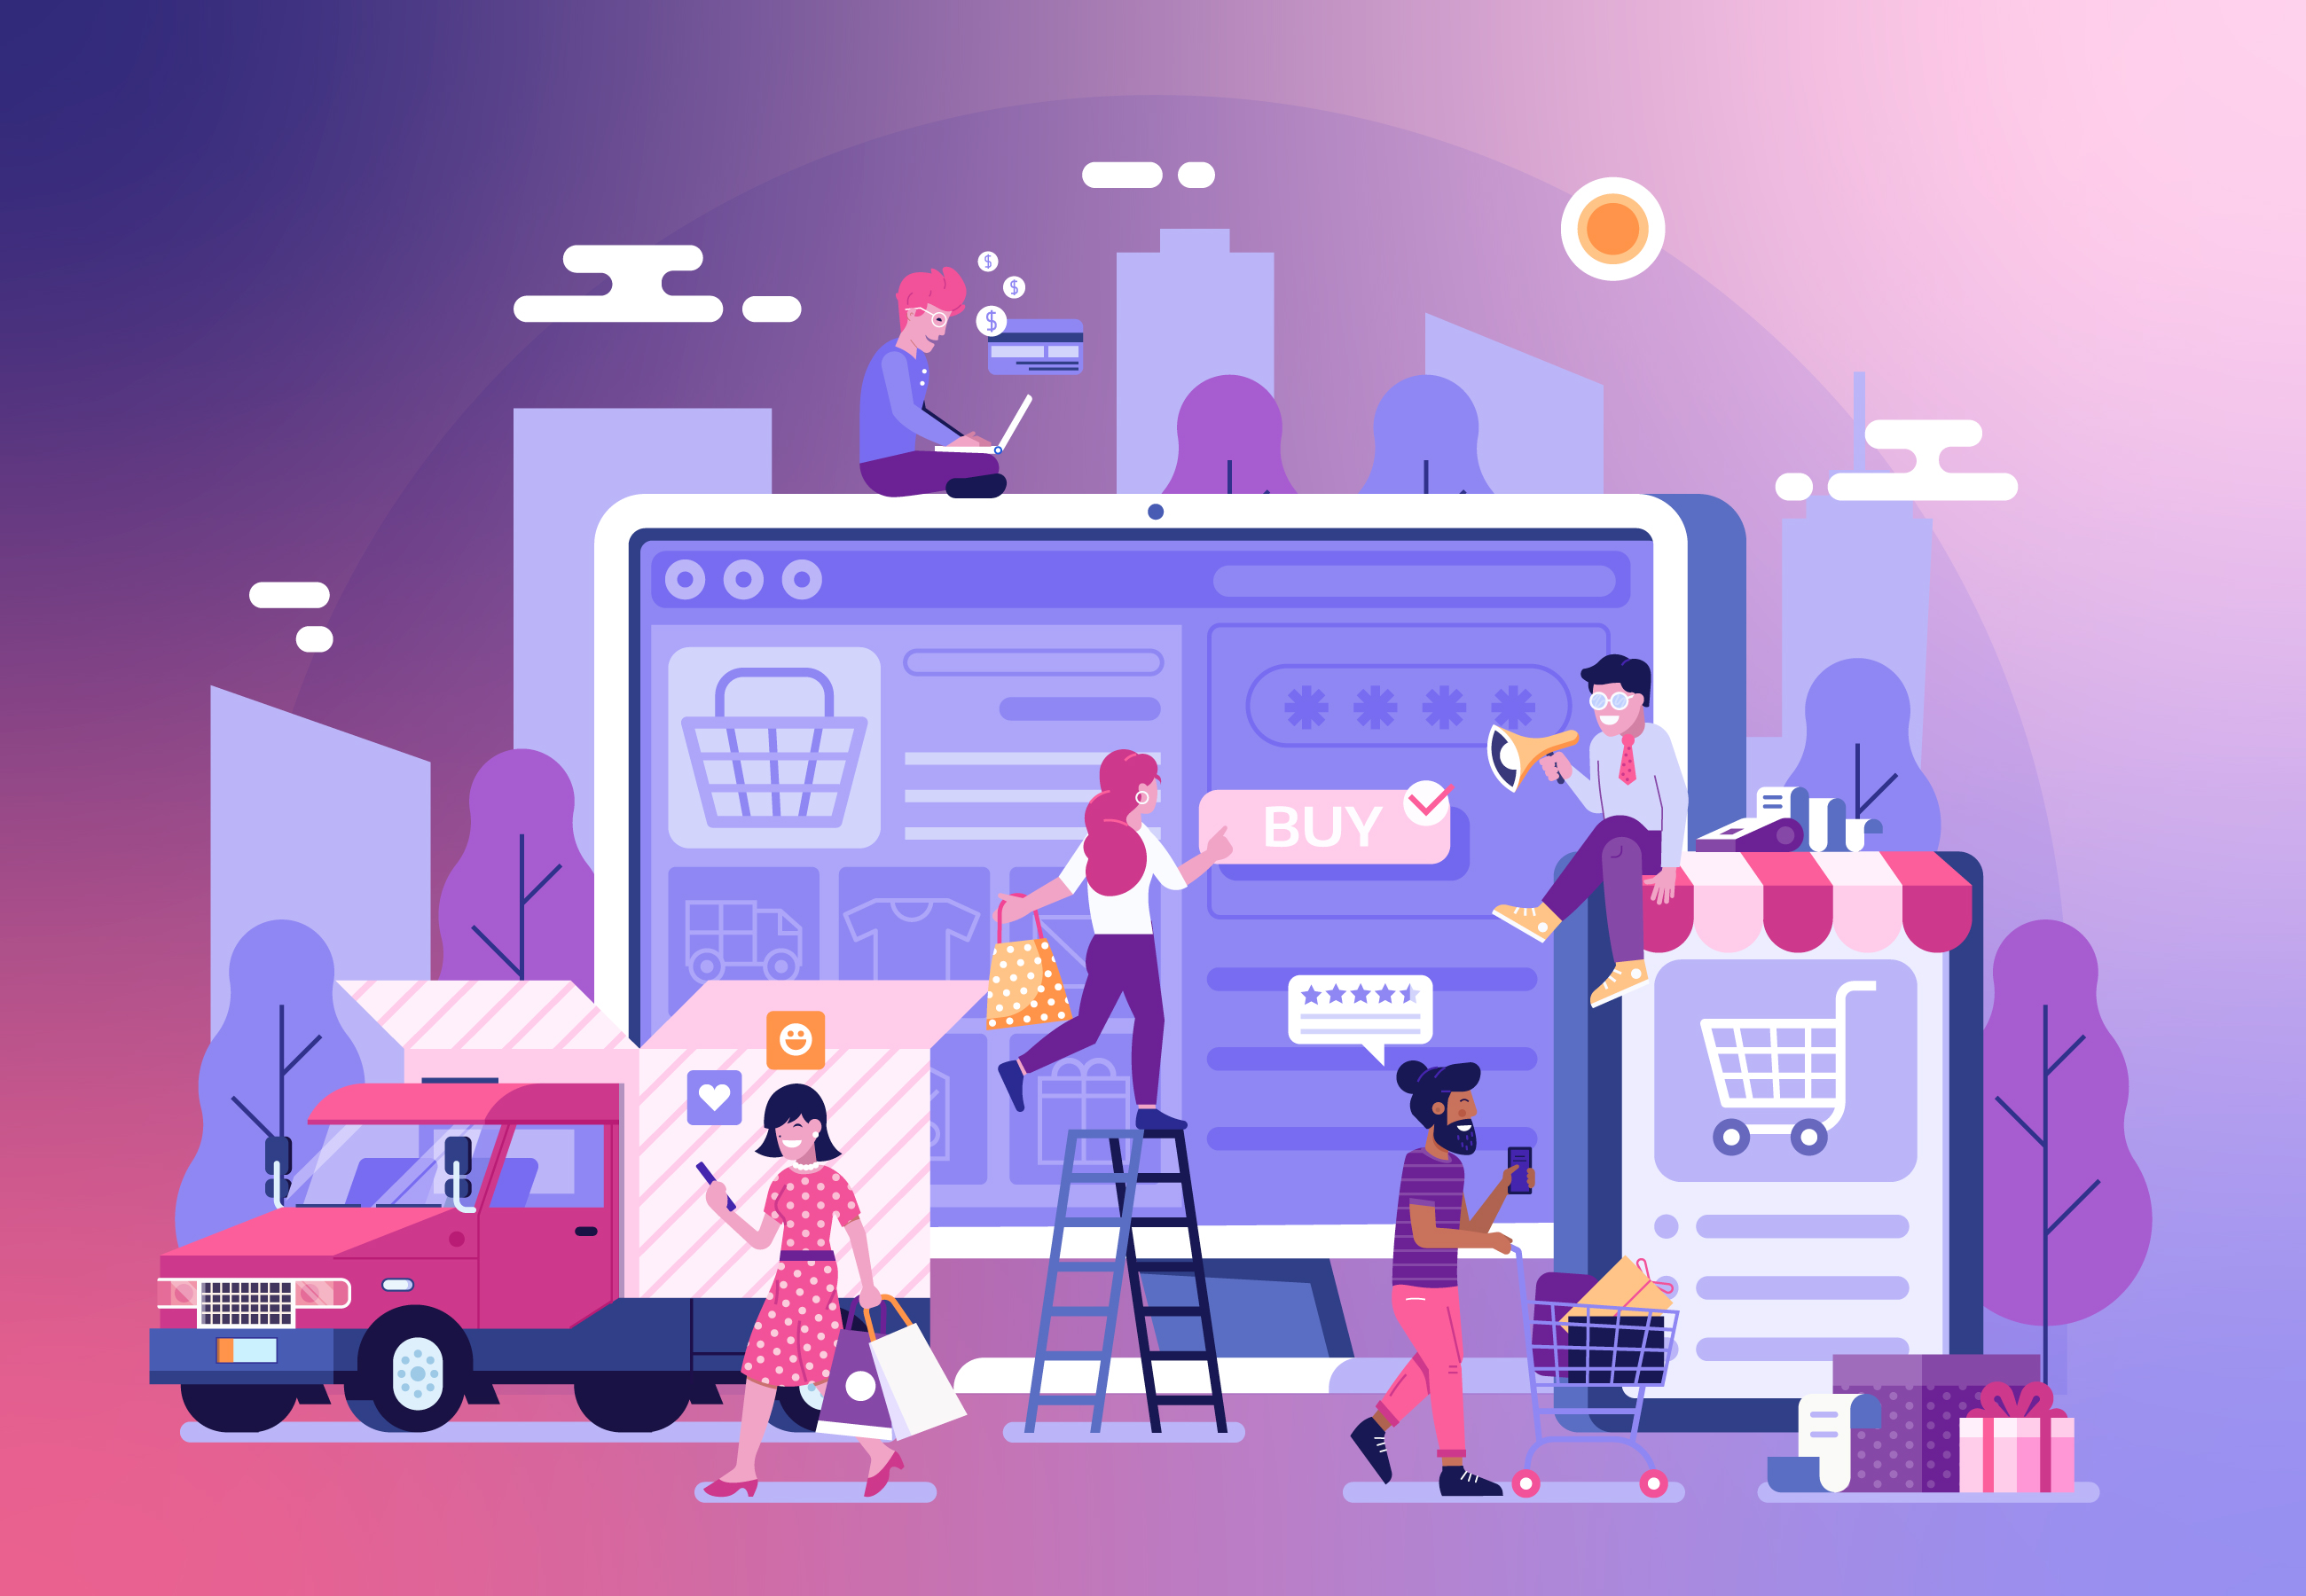 Boldist - Ecommerce Trends in 2021 & Beyond